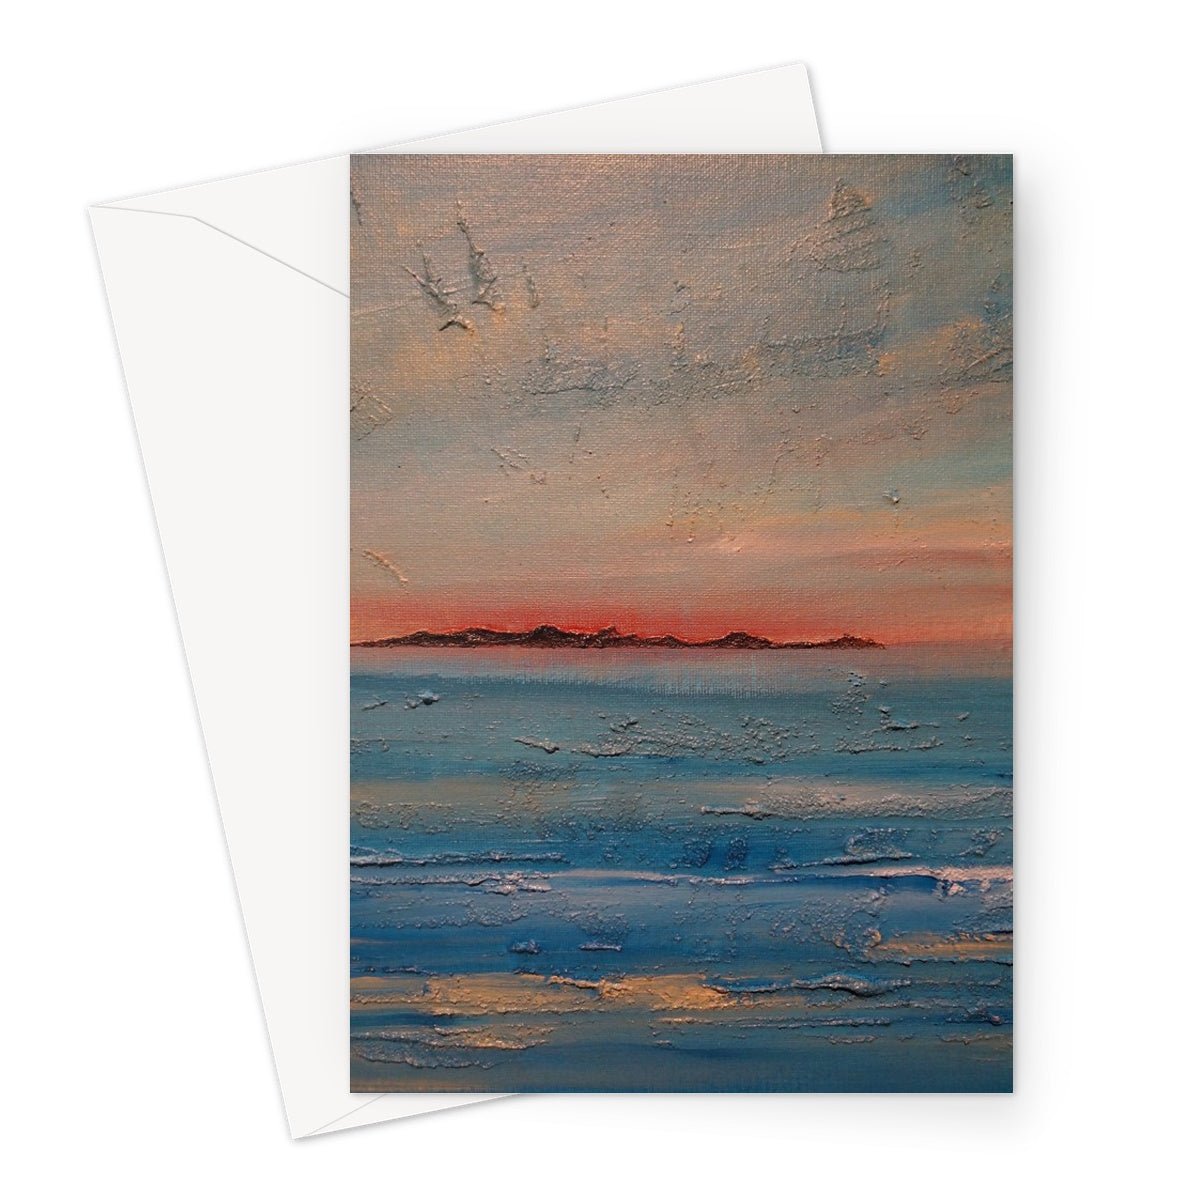 Gigha Sunset Art Gifts Greeting Card-Greetings Cards-Hebridean Islands Art Gallery-A5 Portrait-1 Card-Paintings, Prints, Homeware, Art Gifts From Scotland By Scottish Artist Kevin Hunter